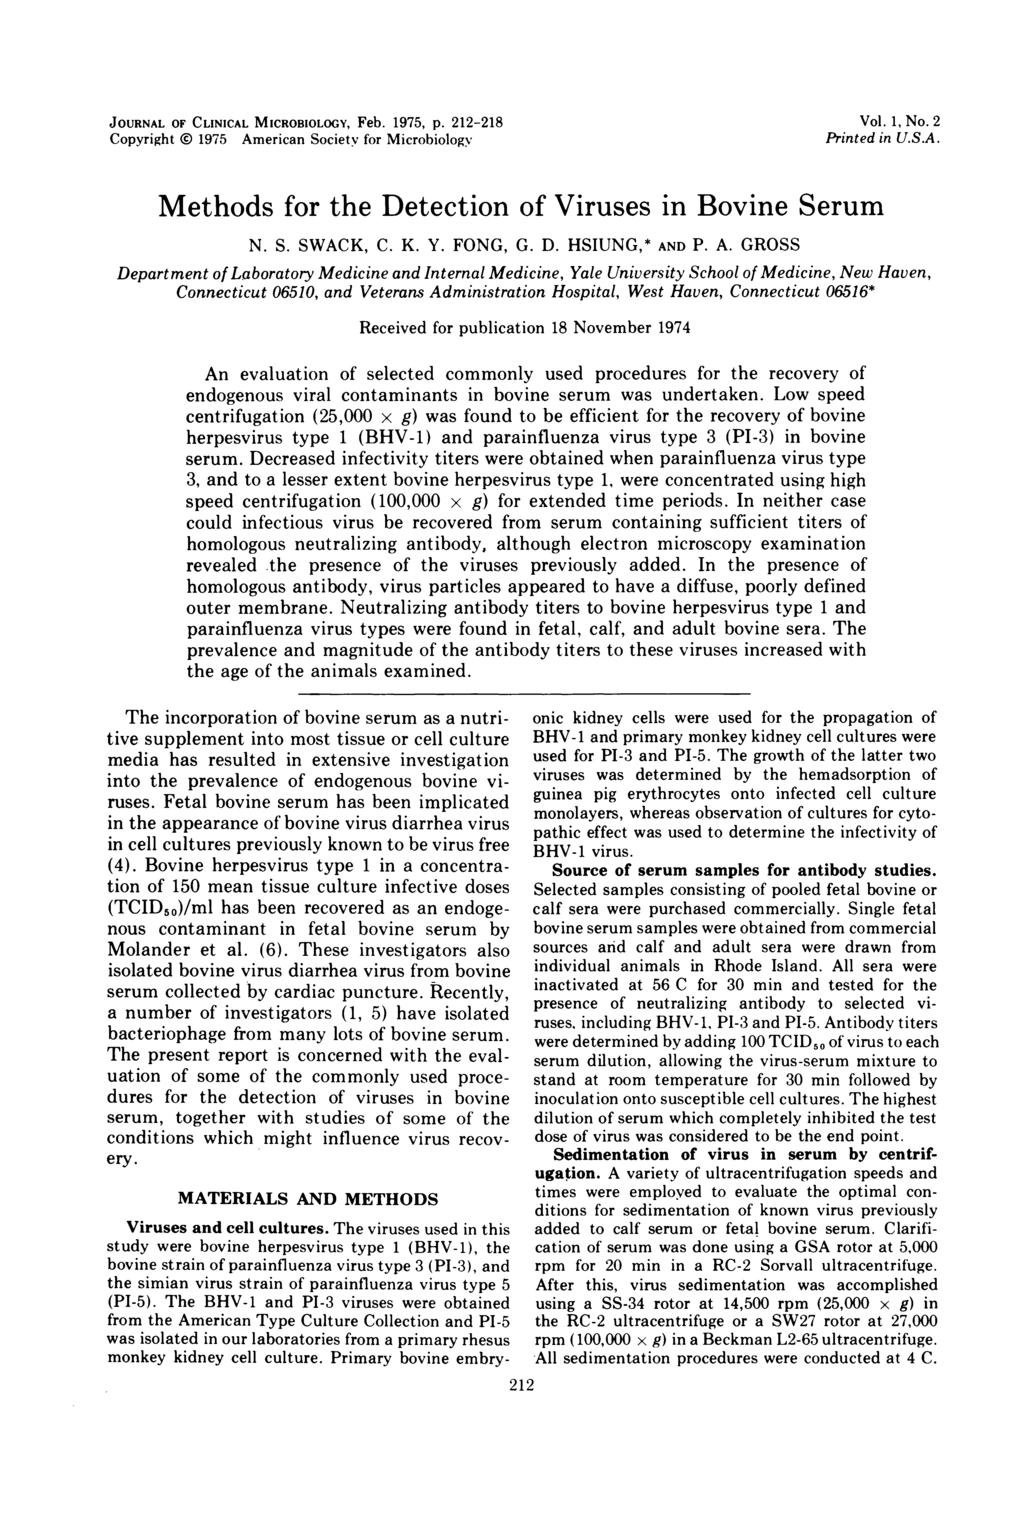 JOURNAL OF CLINICAL MICROBIOLOGY, Feb. 1975, p. 212-218 Copyright 1975 American Societv for Microbiology Vol. 1, No. 2 Printed in U.S.A. Methods for the Detection of Viruses in Bovine Serum N. S. SWACK, C.